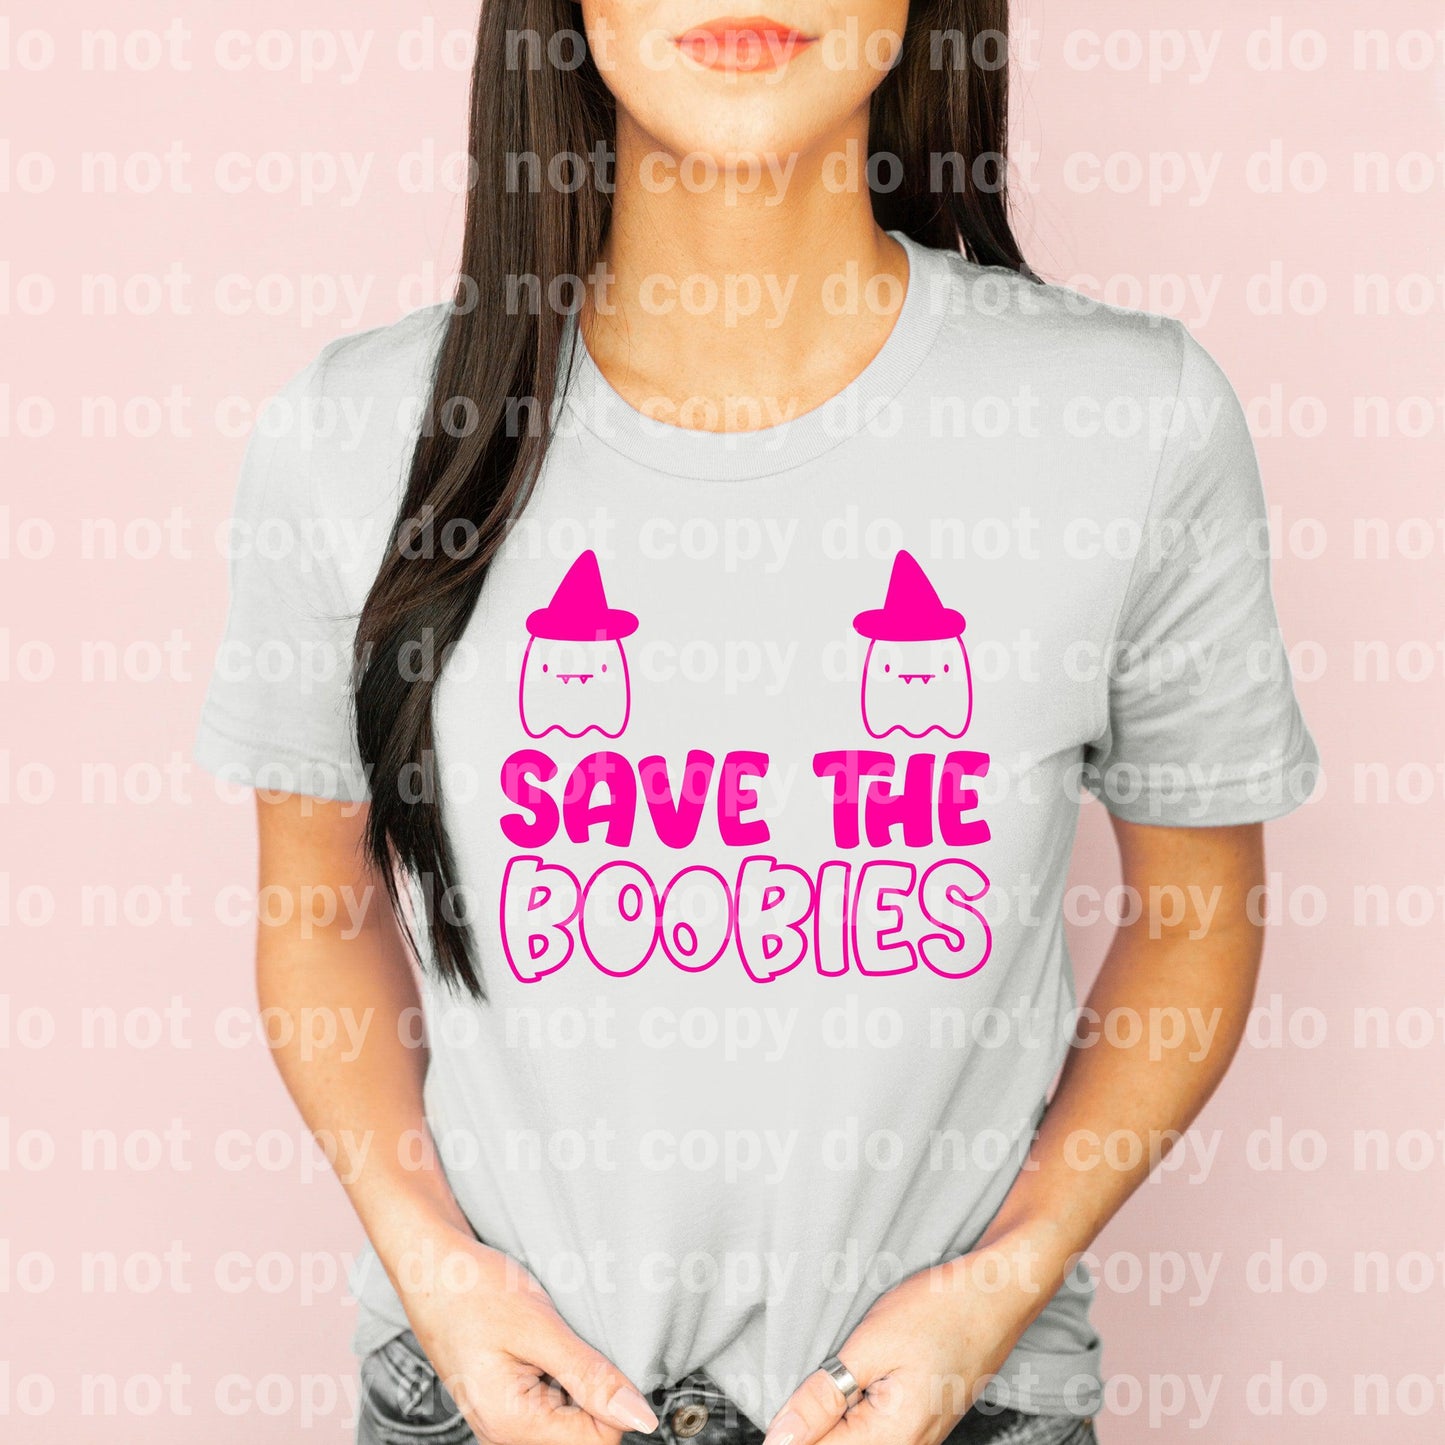 Save The Boobies Cancer Awareness Pink/White Dream Print or Sublimation Print